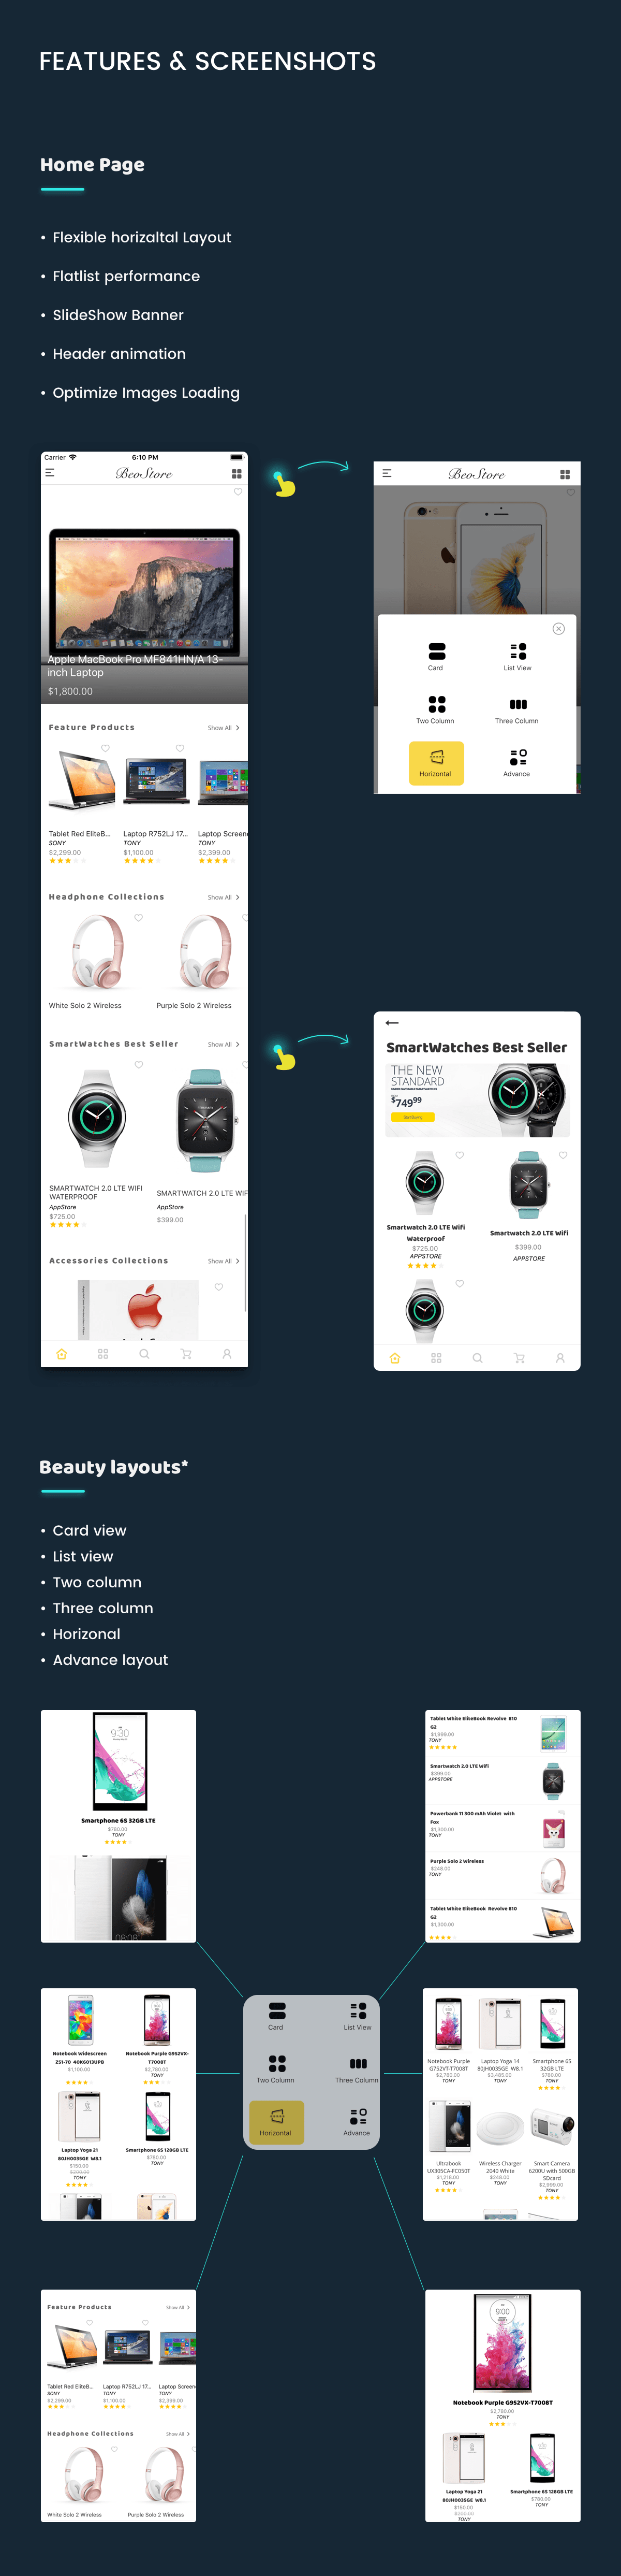 MStore Multi Vendor - Complete React Native template for WooCommerce - 18